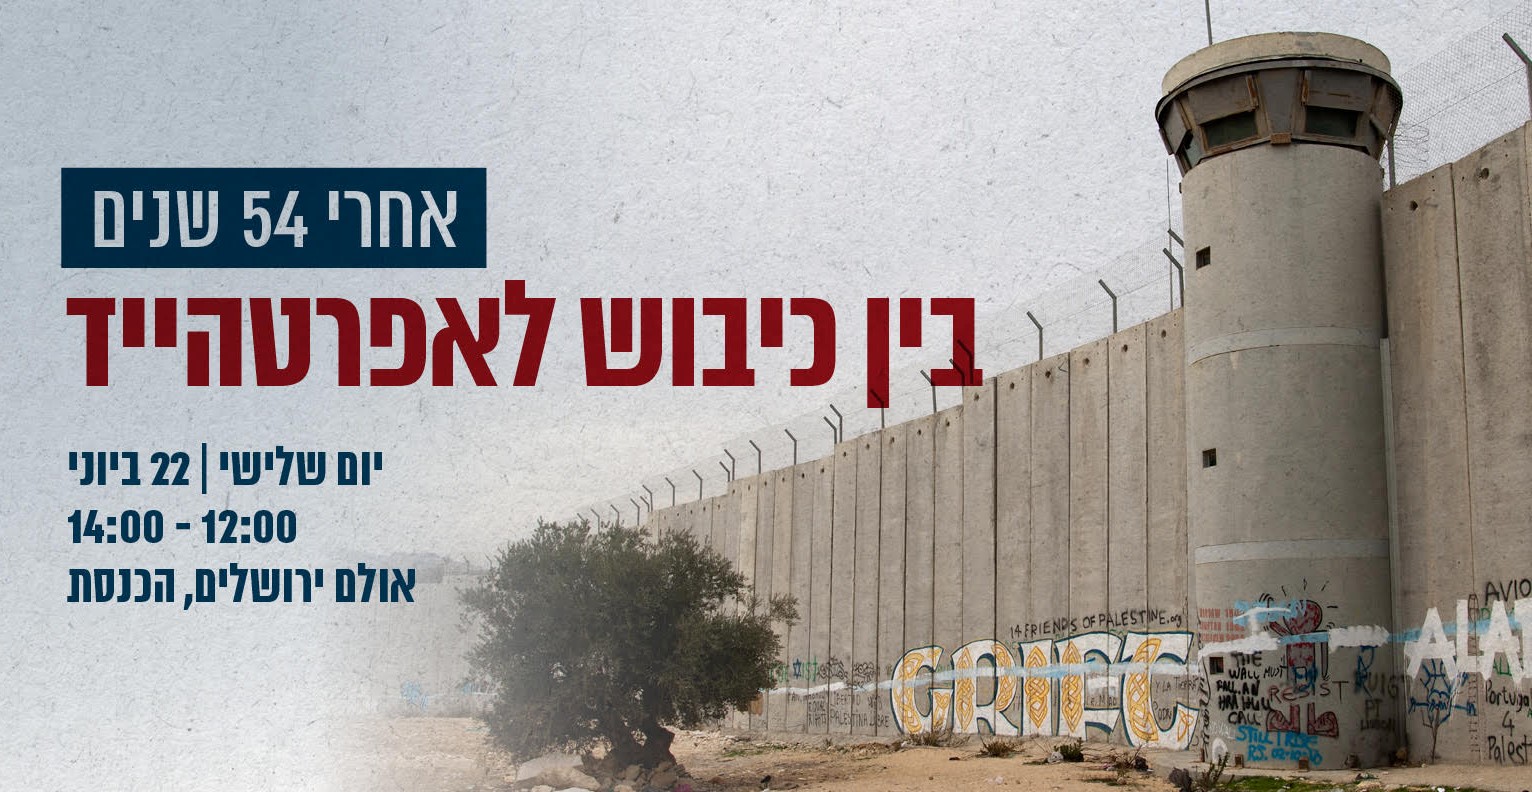 "After 54 Years: Between Occupation and Apartheid,: Tuesday, June 22, 12:00-14:00, Jerusalem 